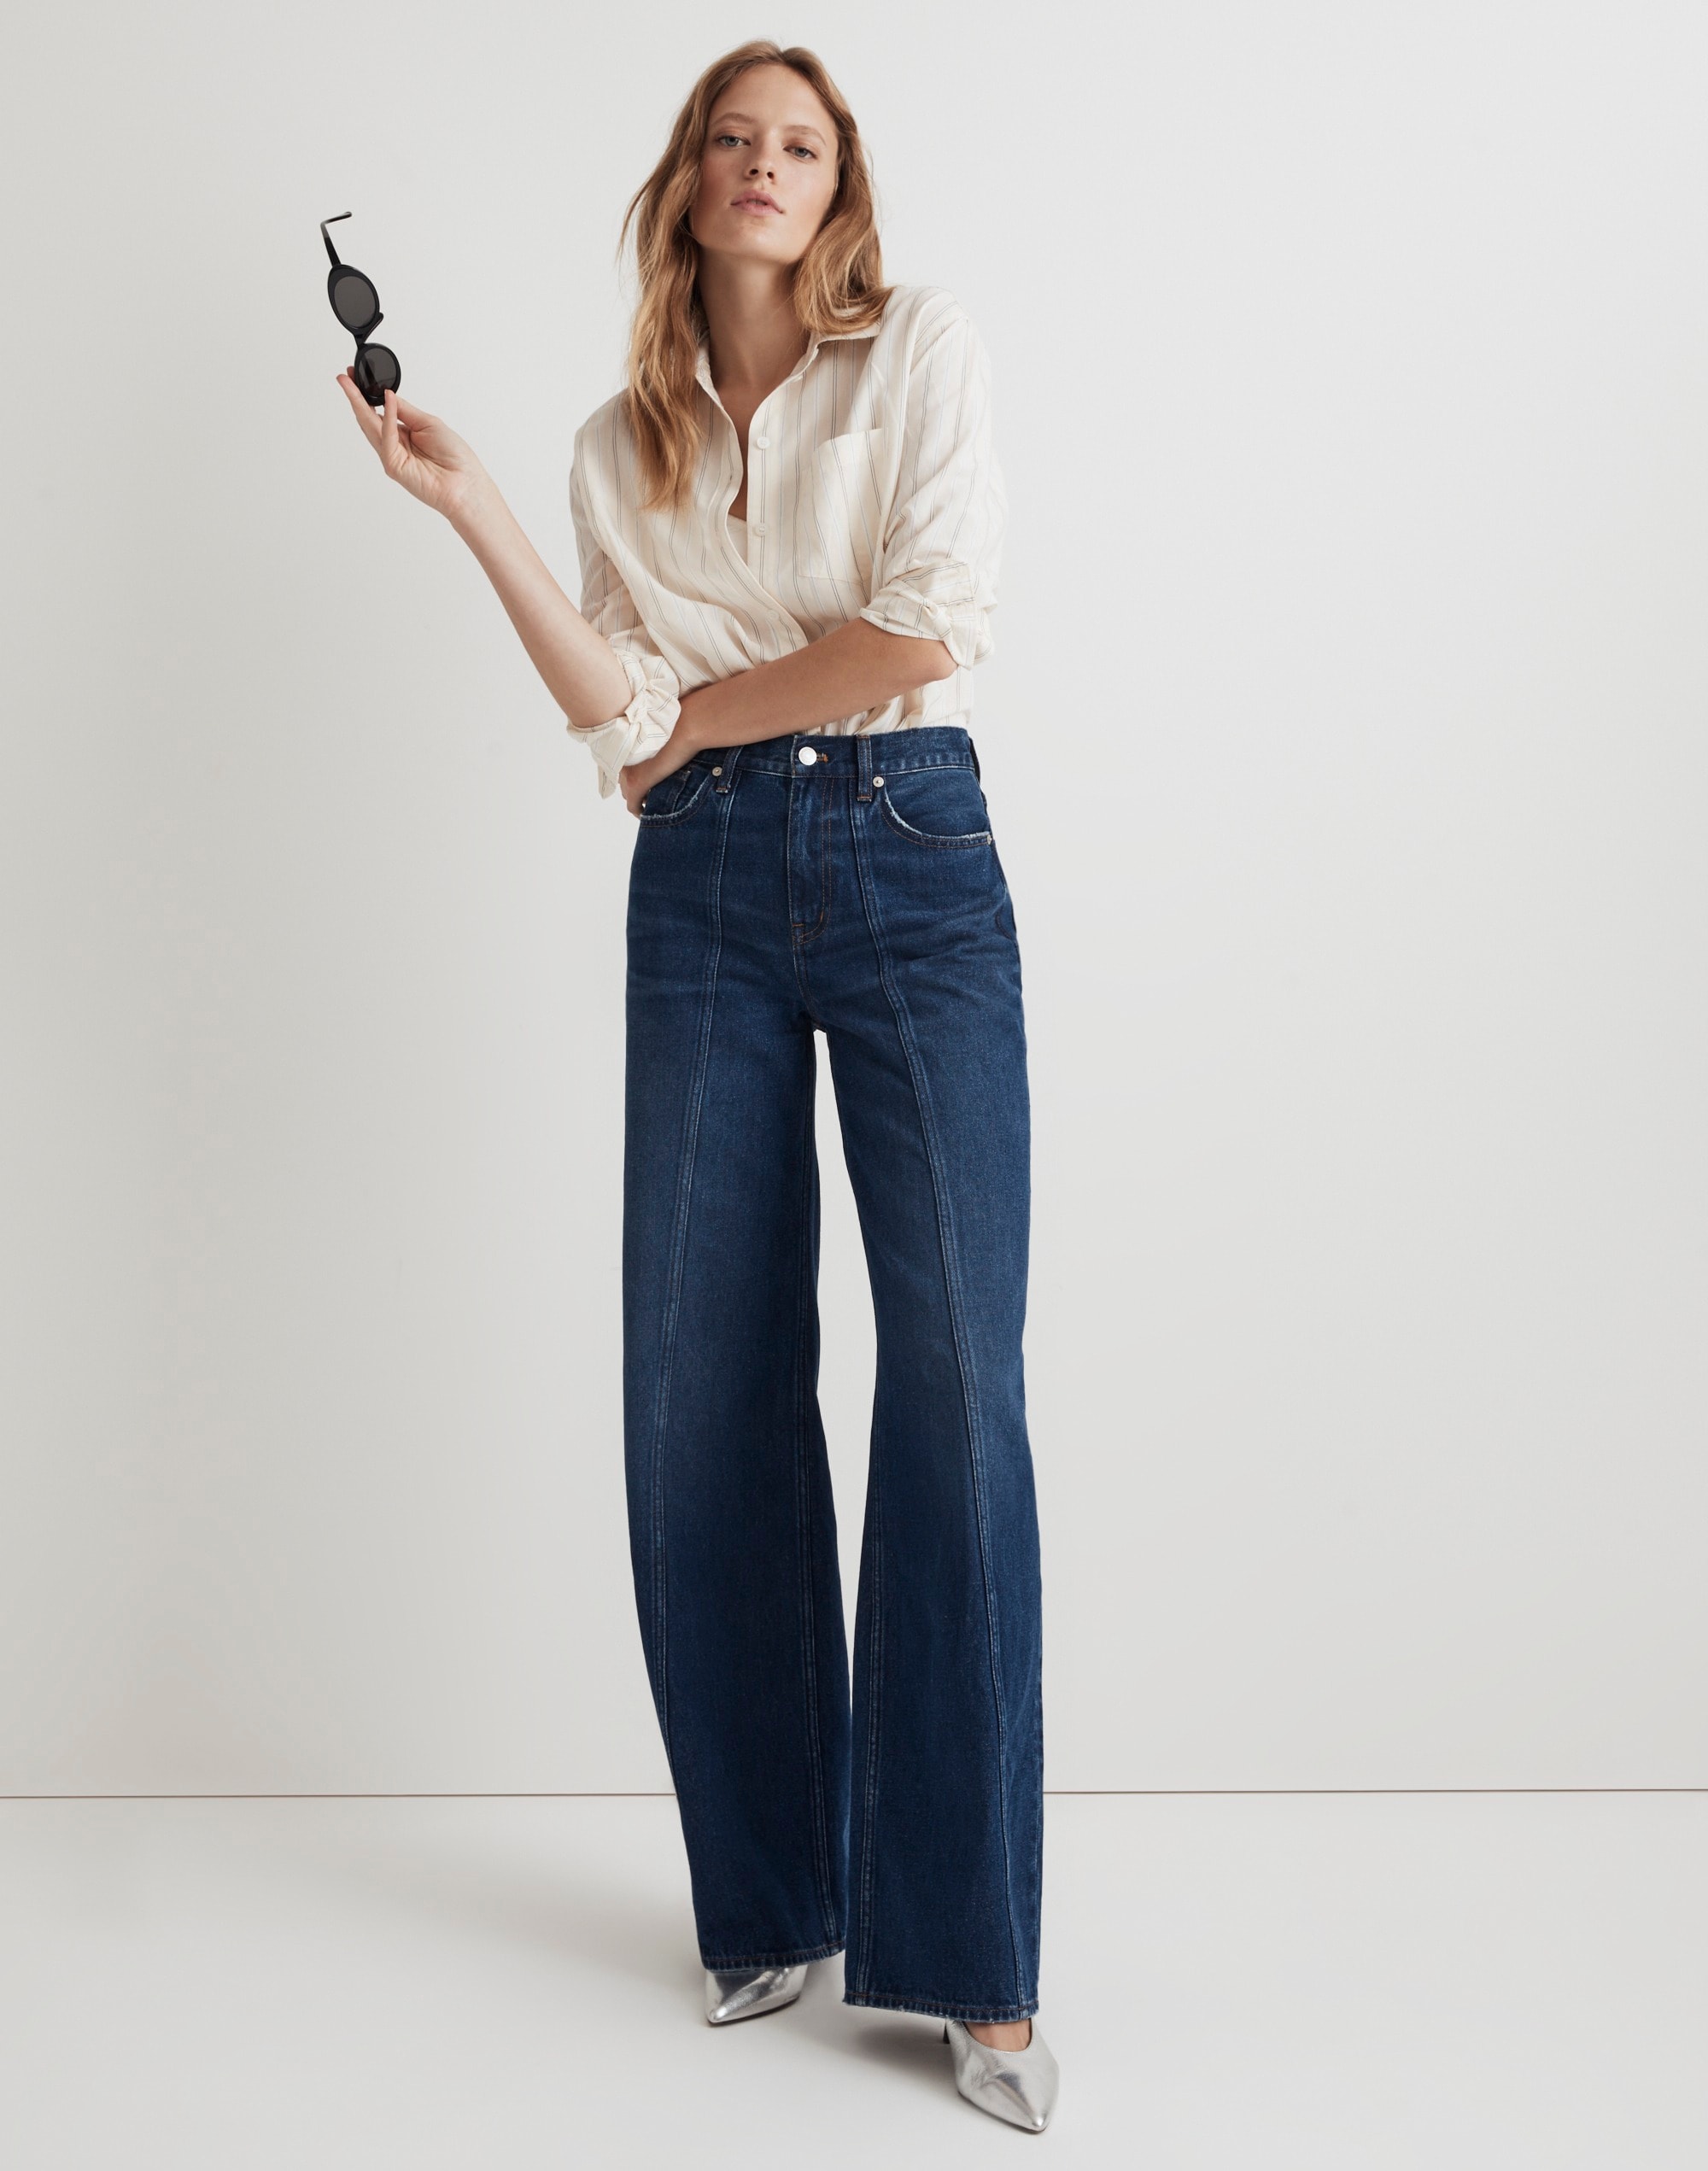 Superwide-Leg Jeans in Carrington Wash: Twisted-Seam Edition | Madewell